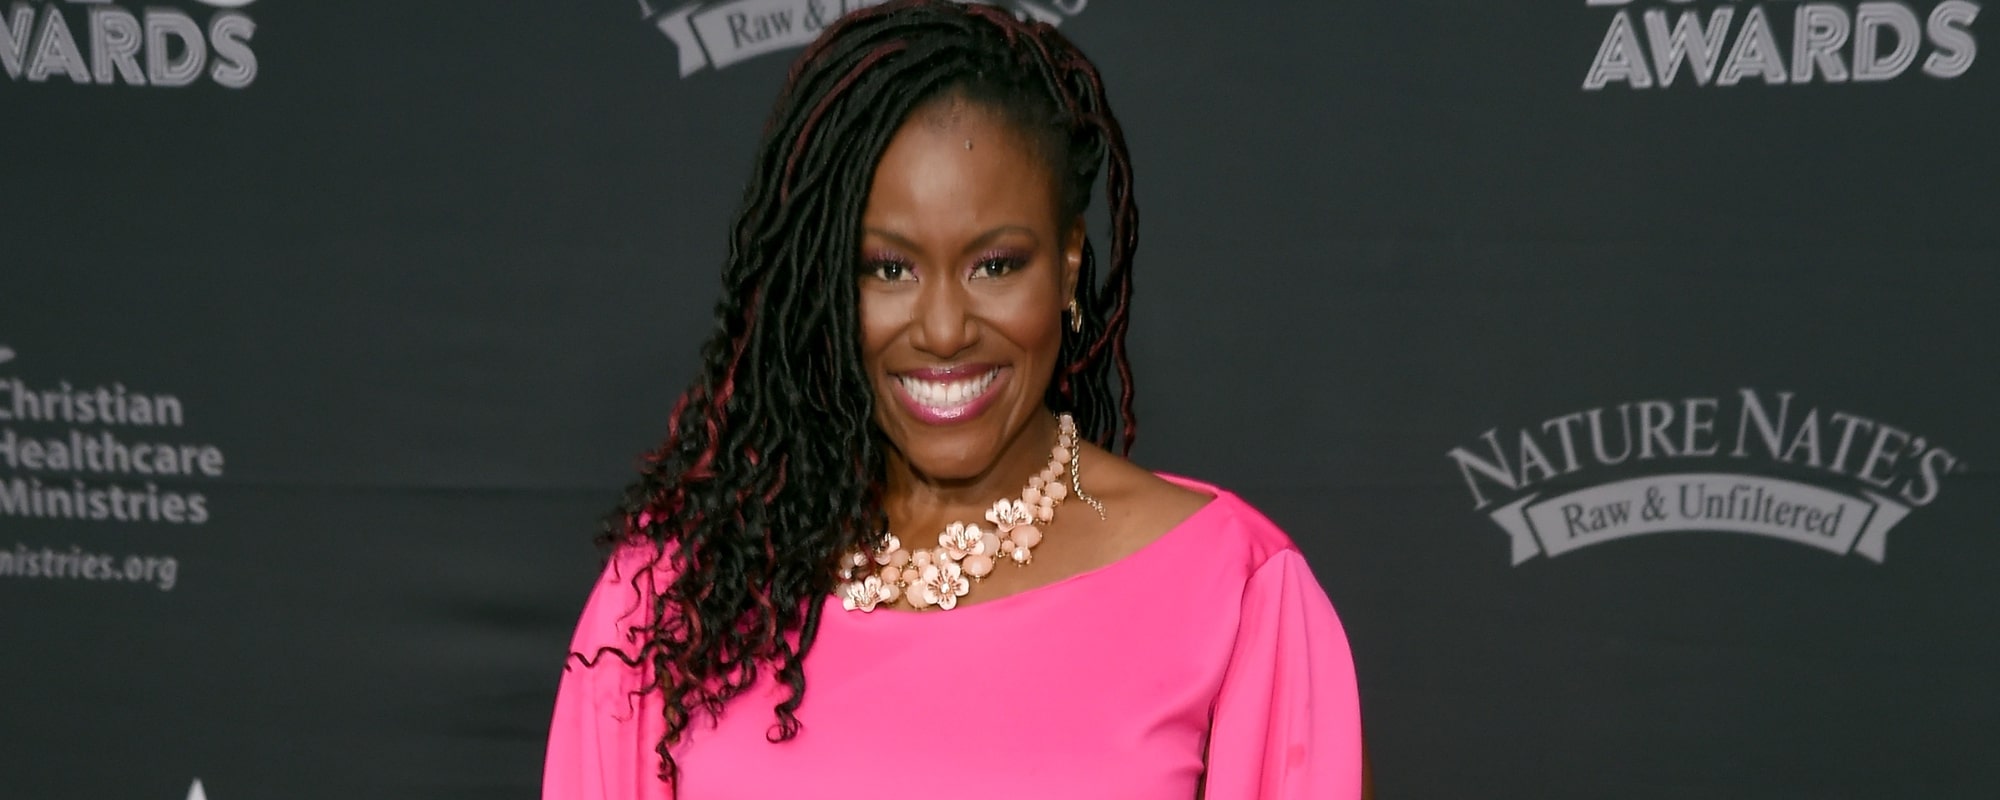 Mandisa forgave Simon Cowell for his mean comments during her audition.